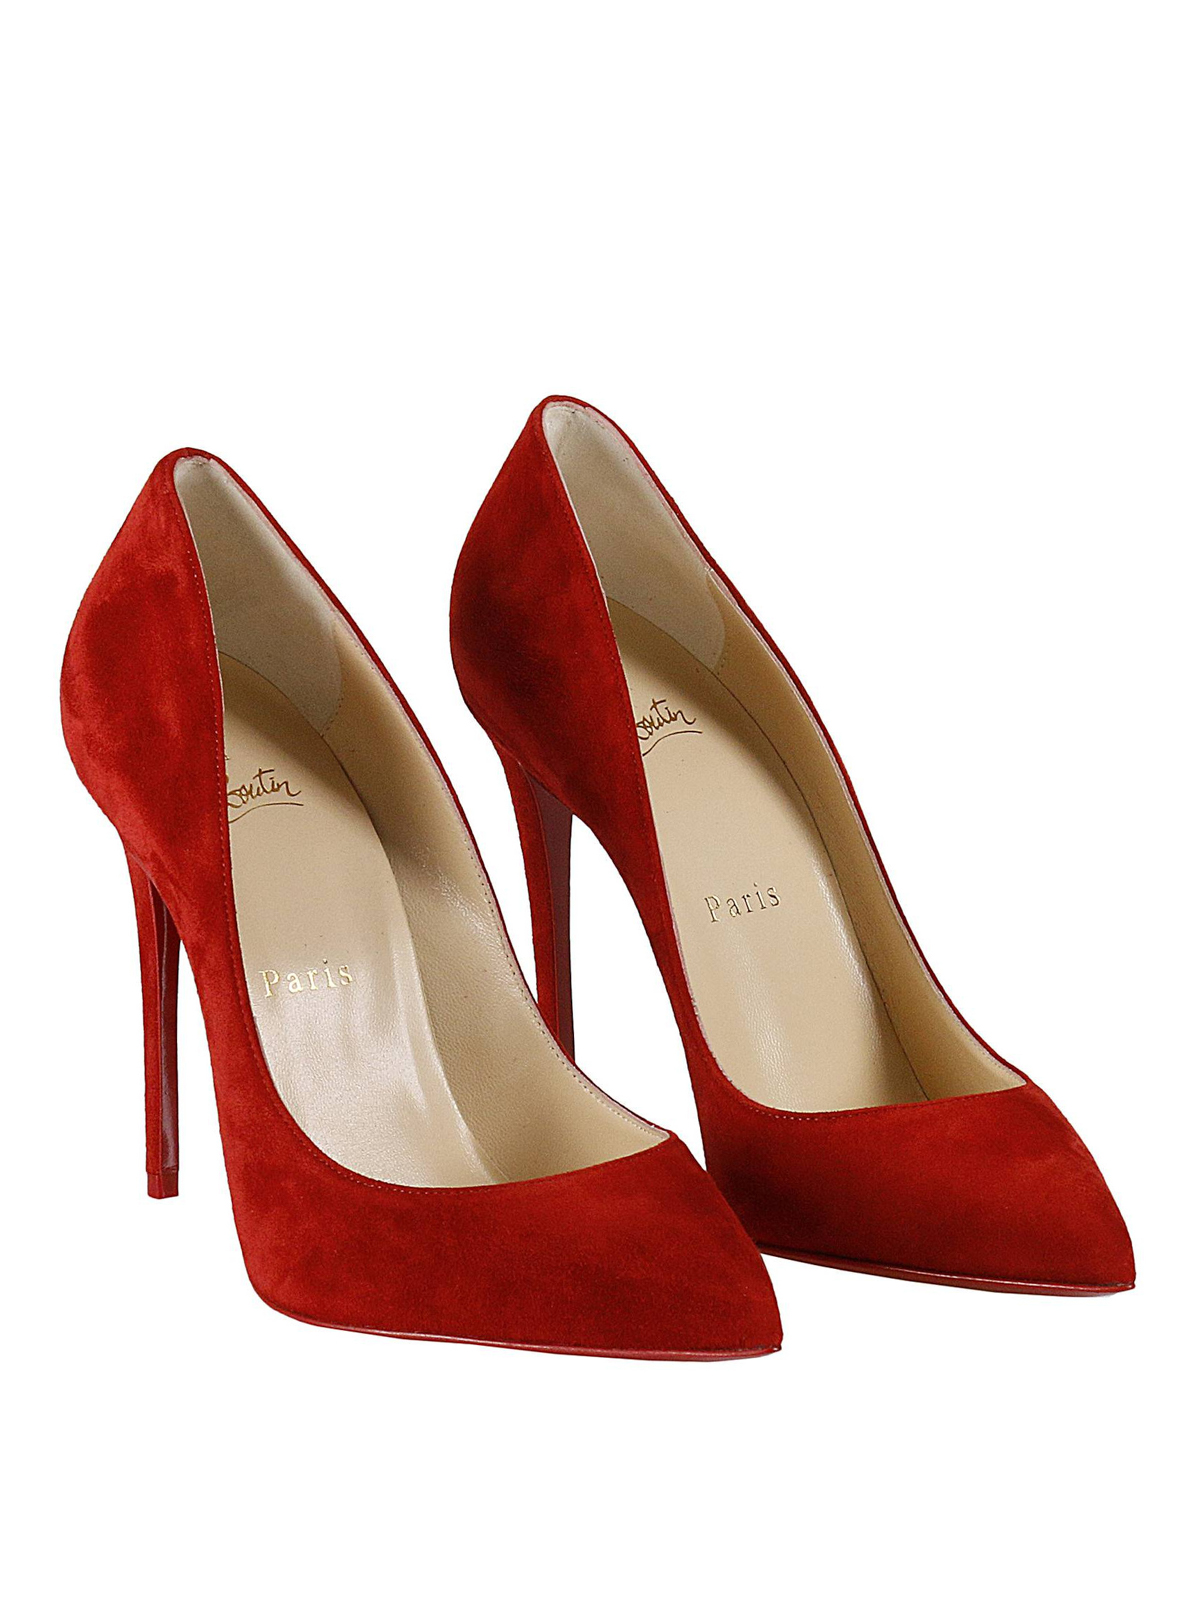 Pigalle Follies red suede pumps 